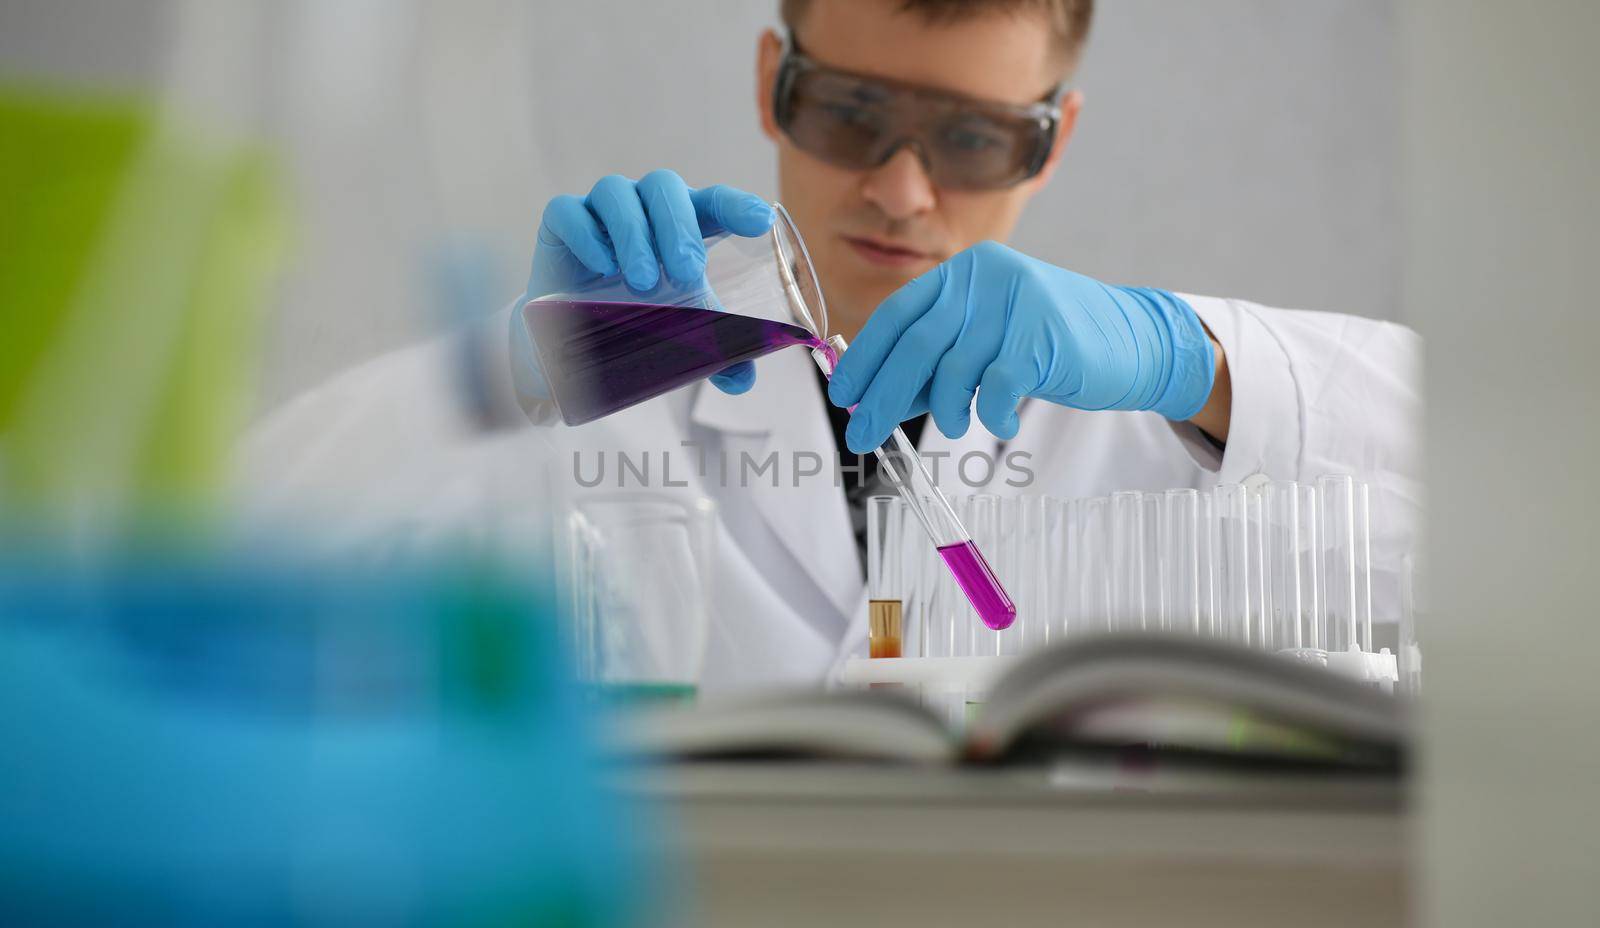 Scientist in protective gloves holding test tube of purple liquid. Laboratory research of poisonous liquids concept